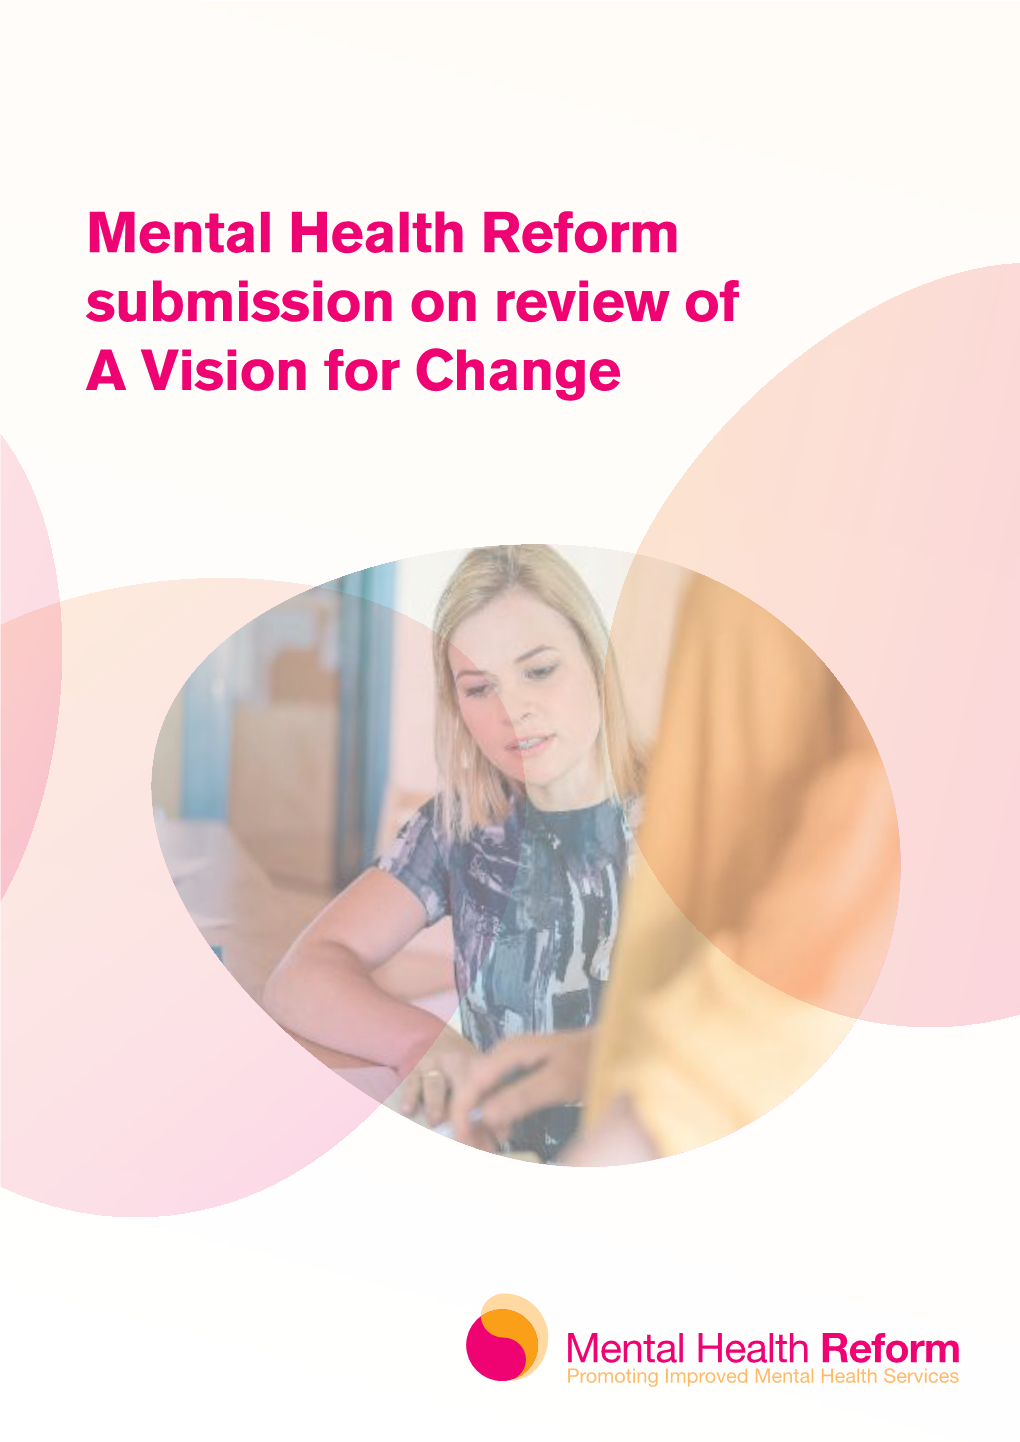 Mental Health Reform Submission on Review of a Vision for Change Published September 2017